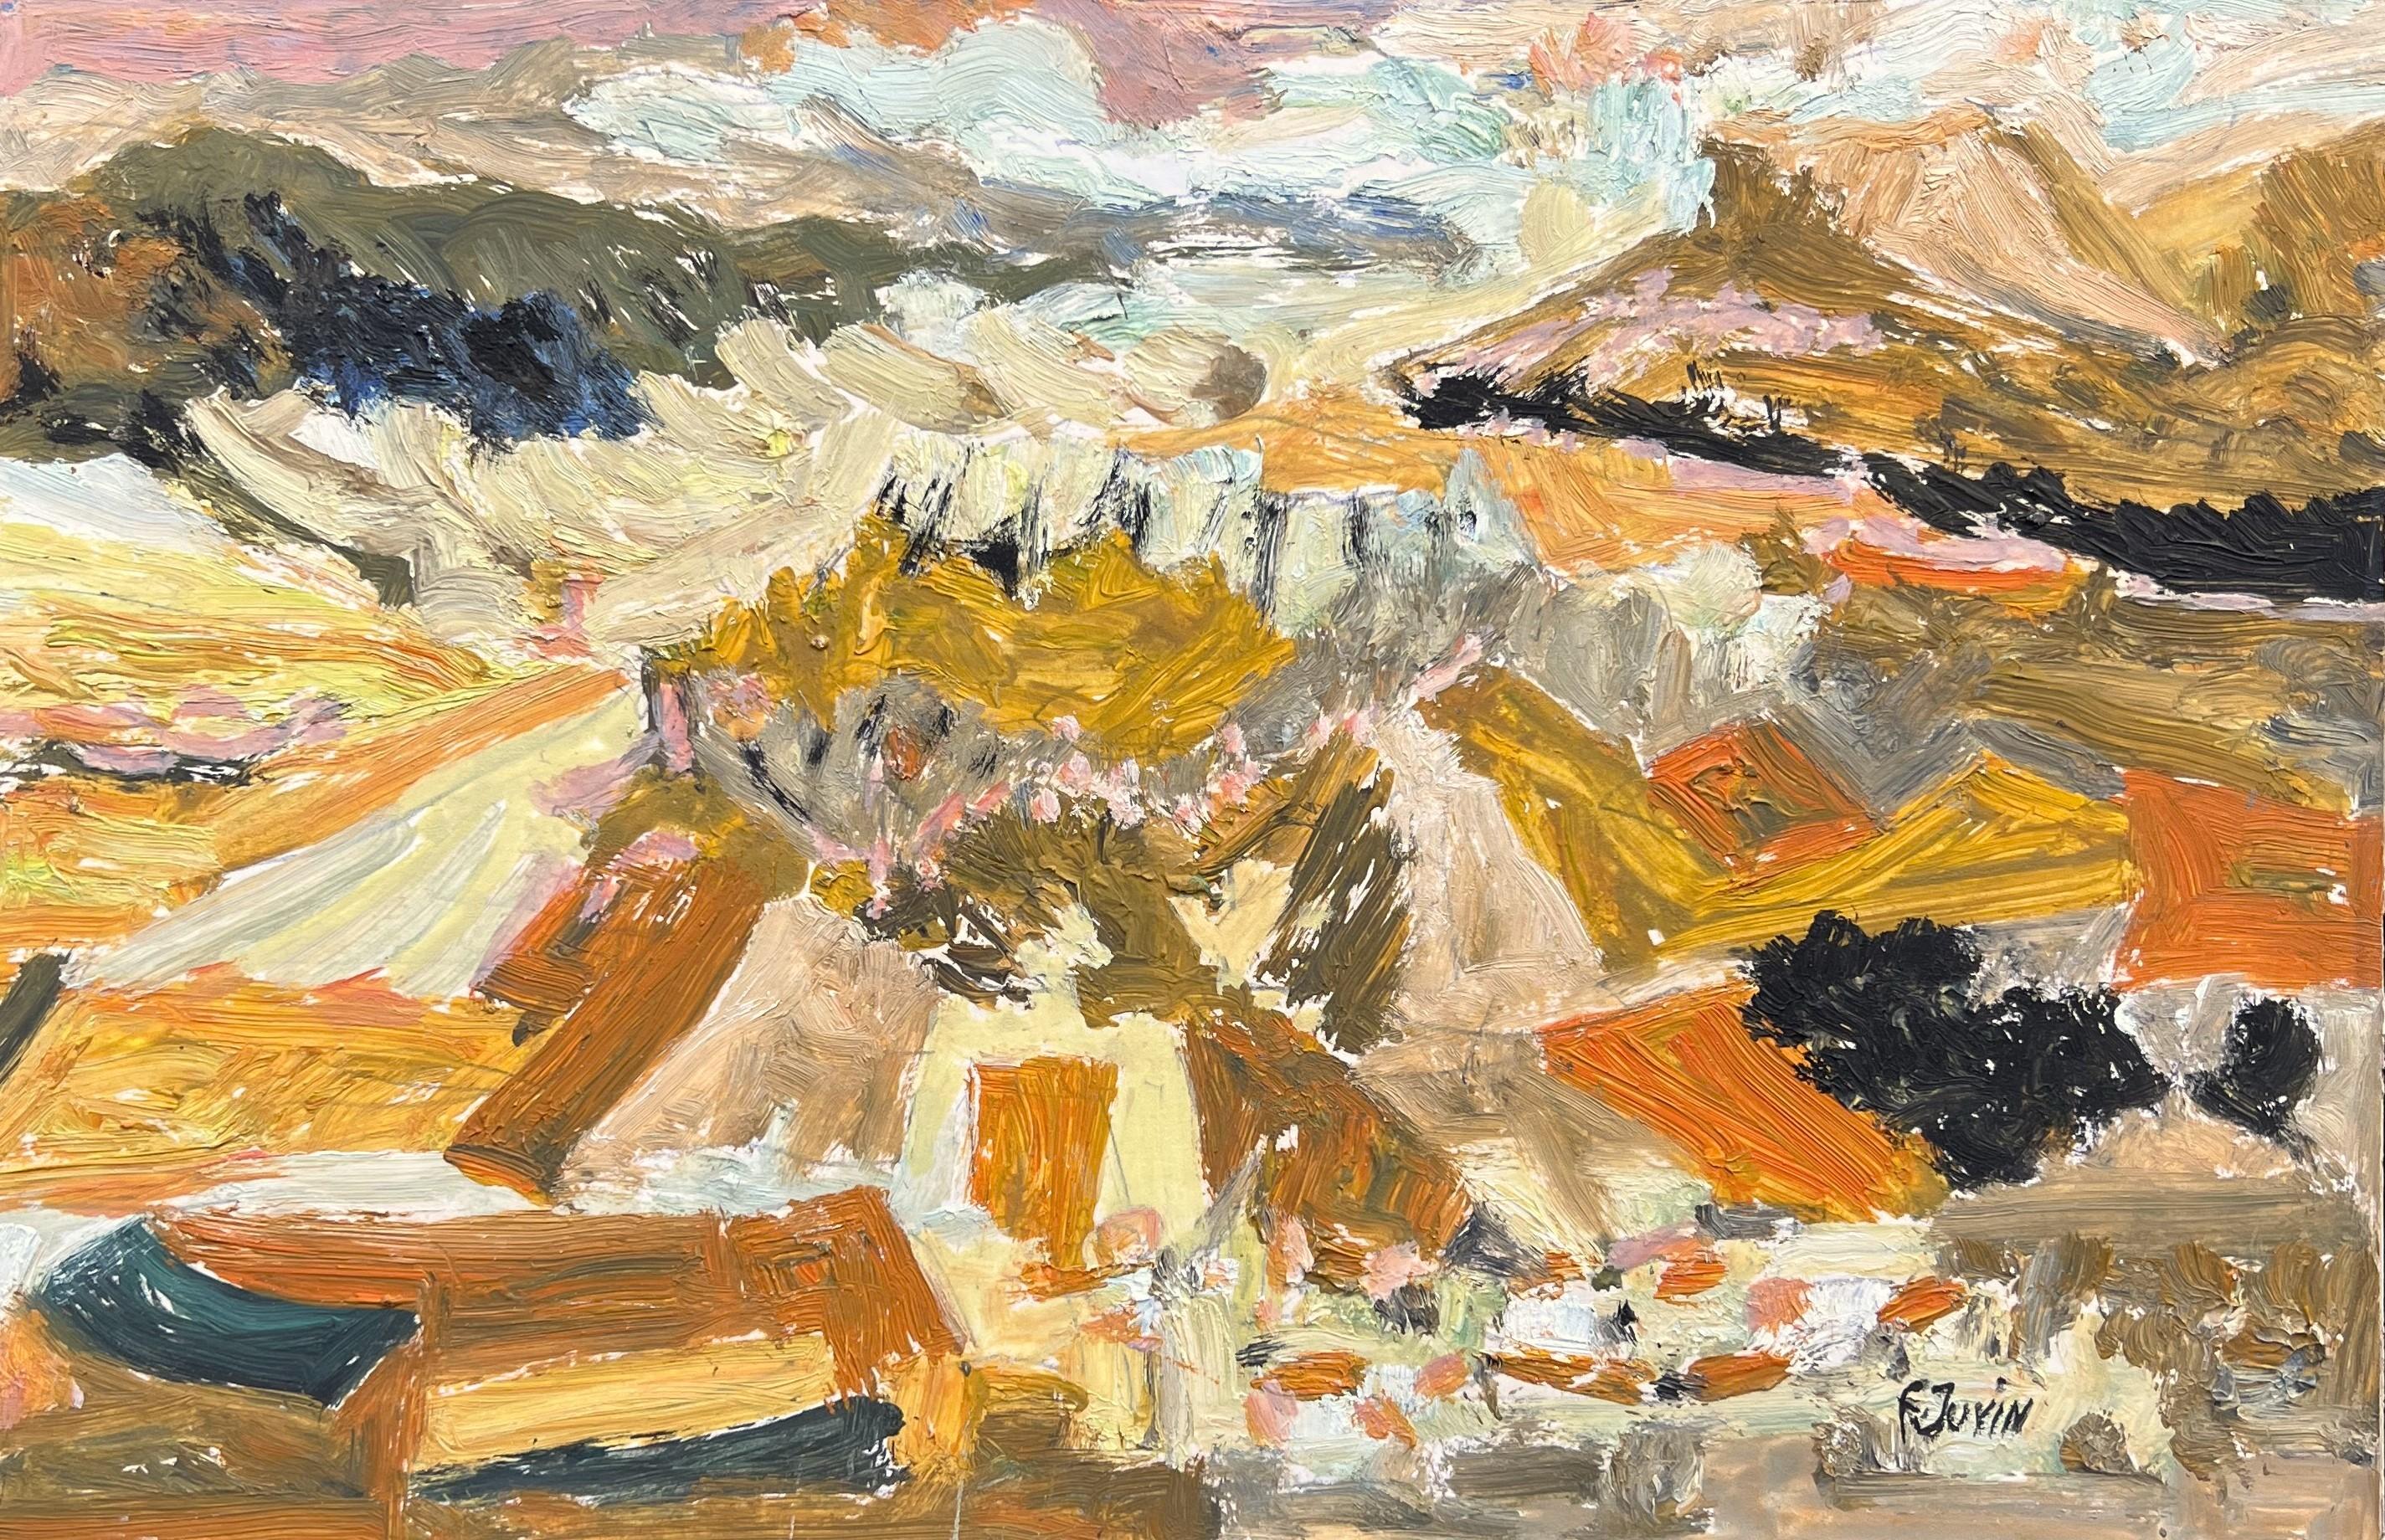 Françoise Juvin - Autumn Landscape
Reference number FJ16
Framed with an black color wooden floated frame.
23,5 x 34 cm frame included (18 x 26 cm without frame)
This work is painted with oil on a paper that is mounted on a board and placed in a made